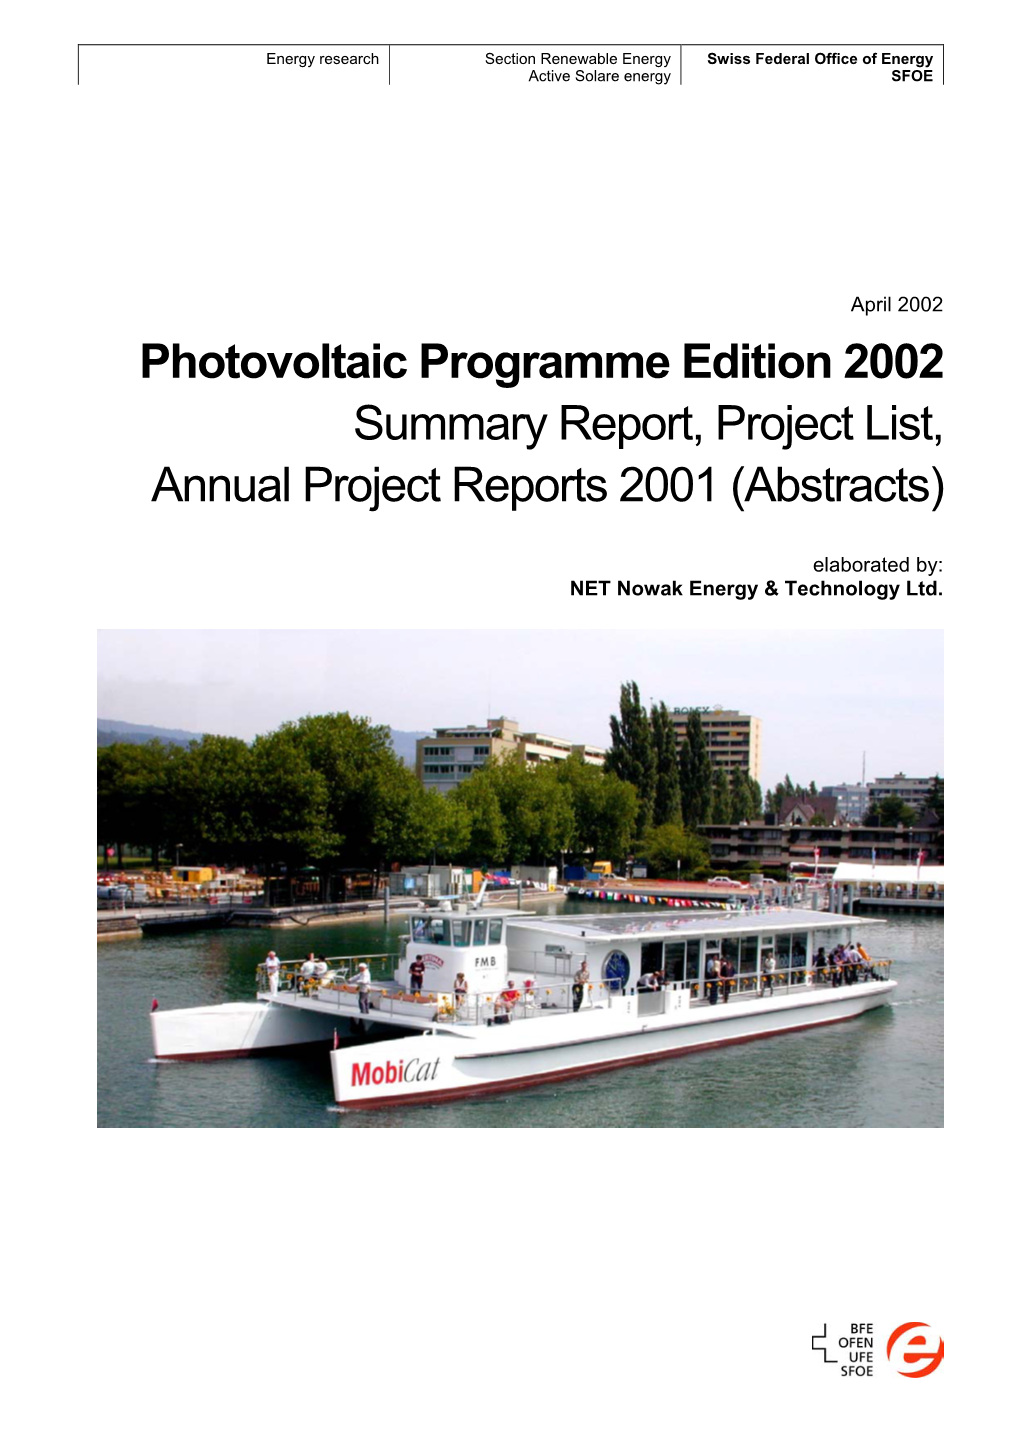 Photovoltaic Programme Edition 2002 Summary Report, Project List, Annual Project Reports 2001 (Abstracts)